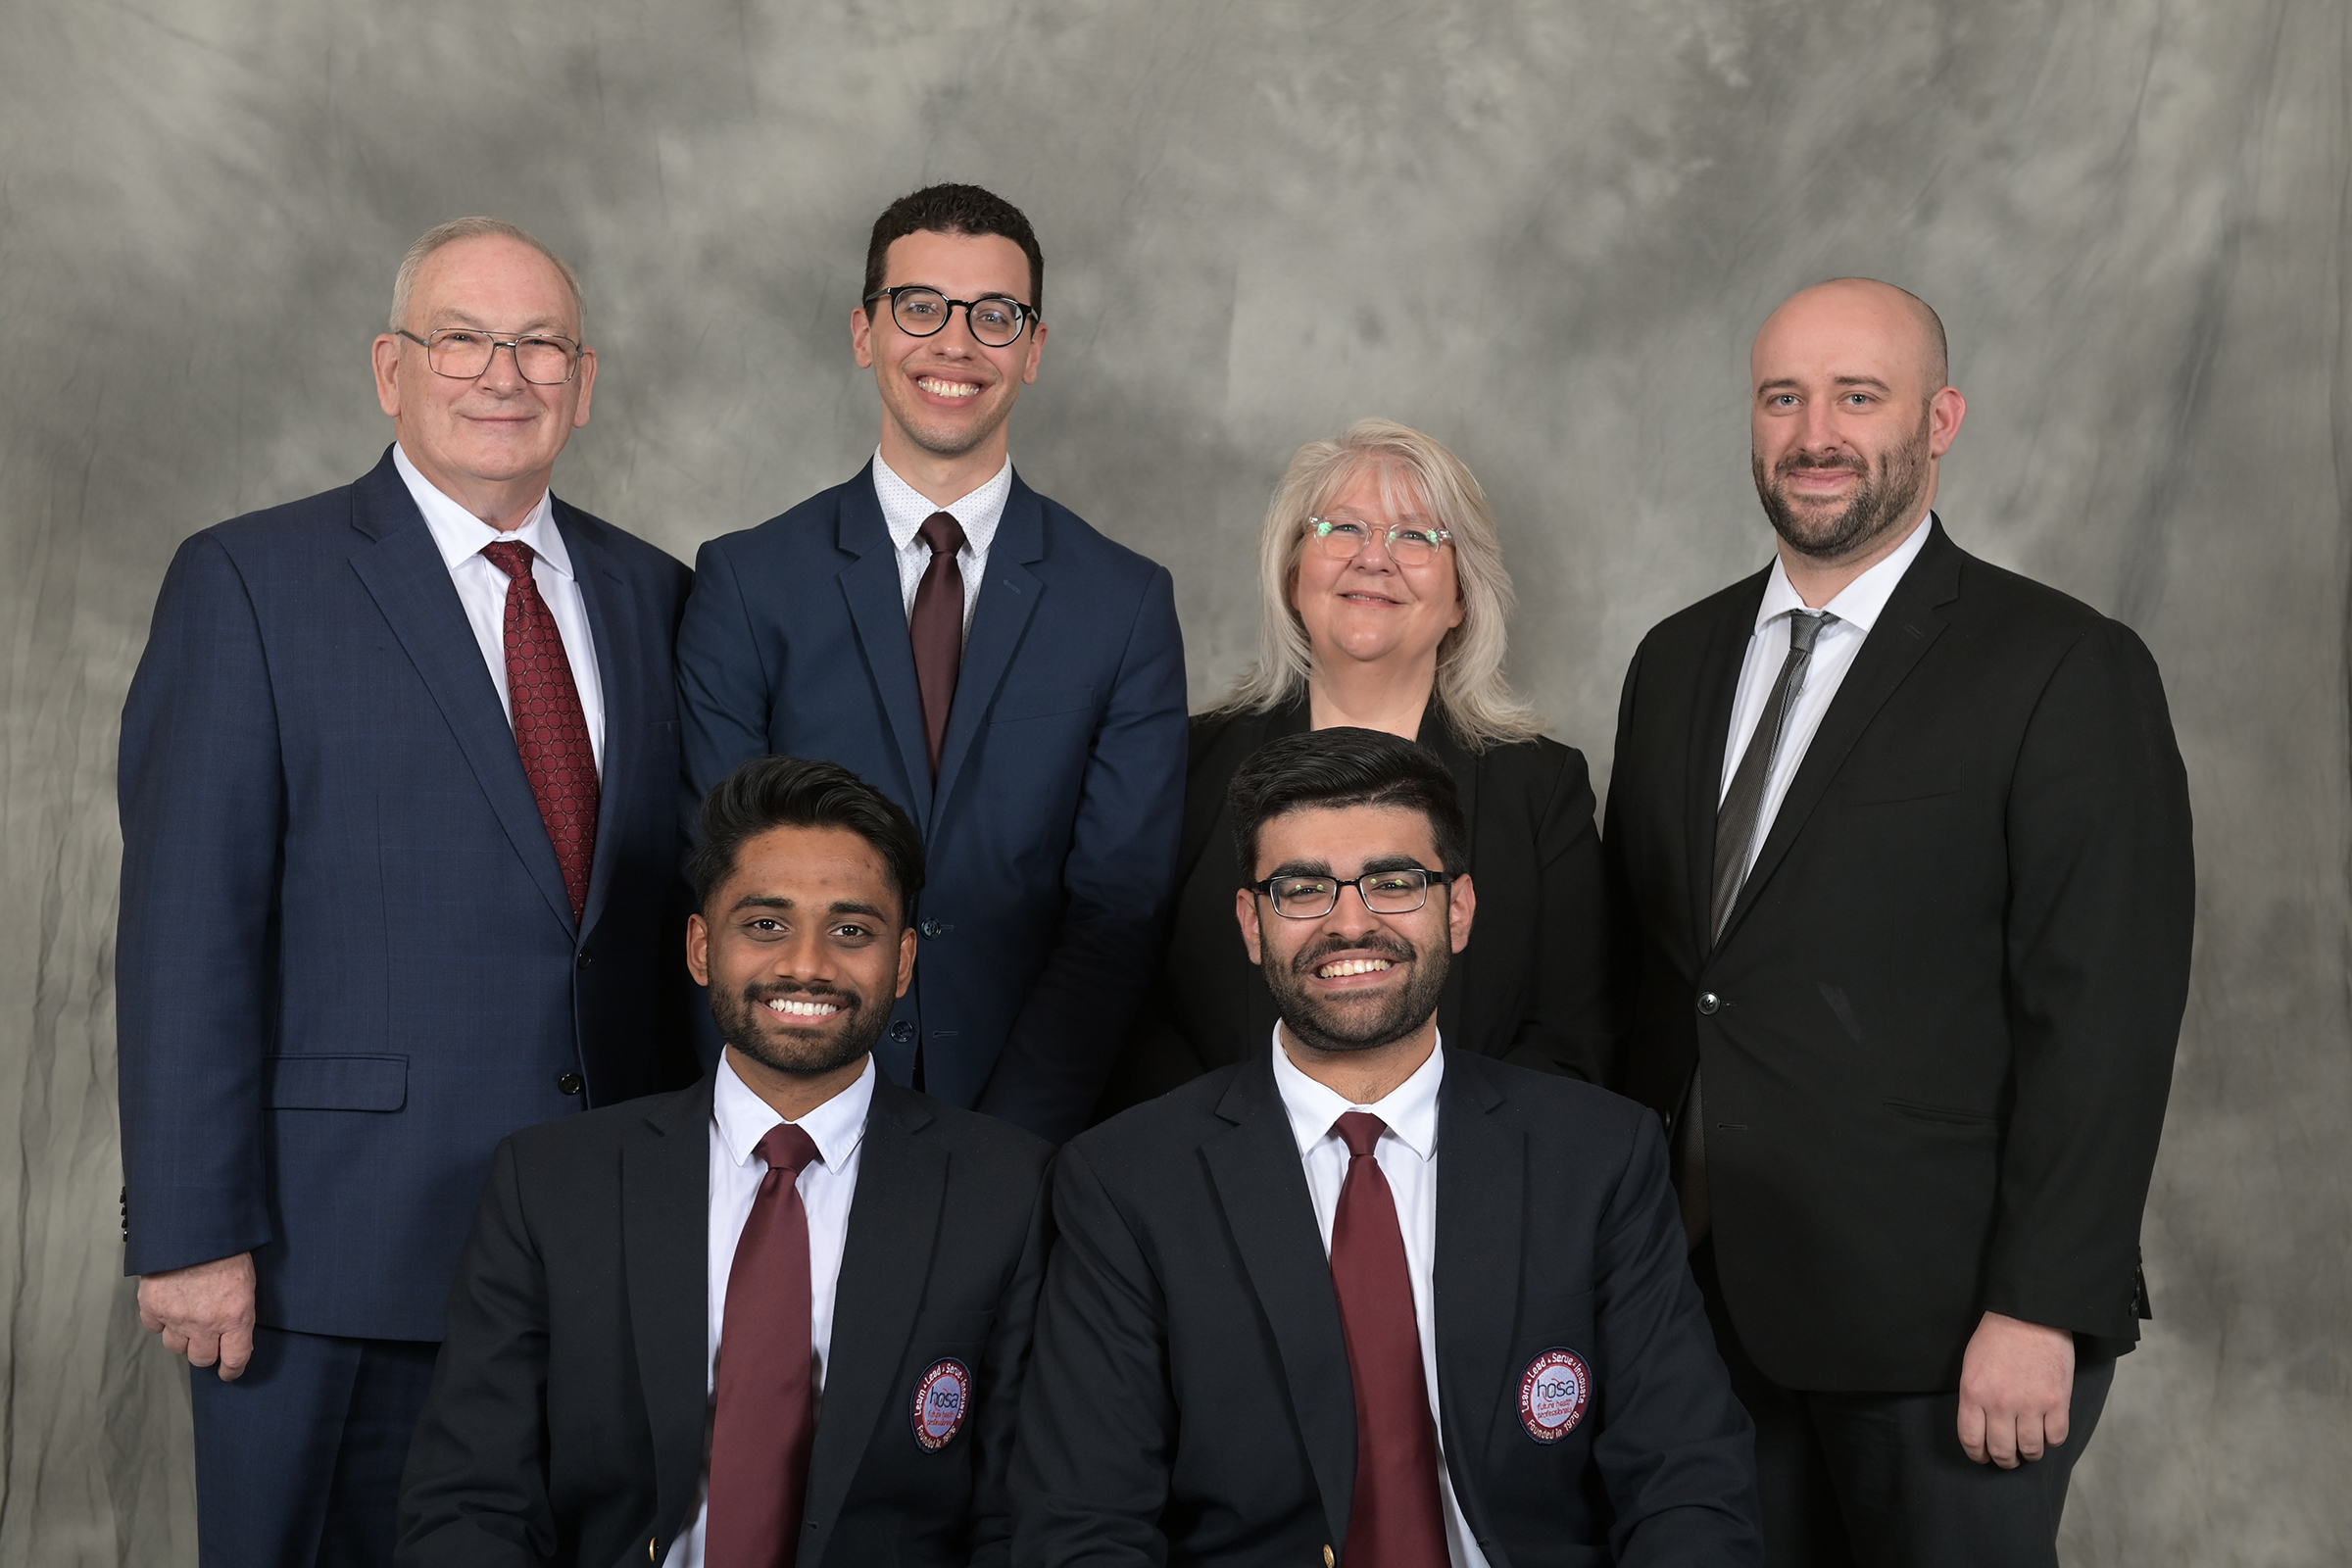 2022 HOSA Board Officers Elected